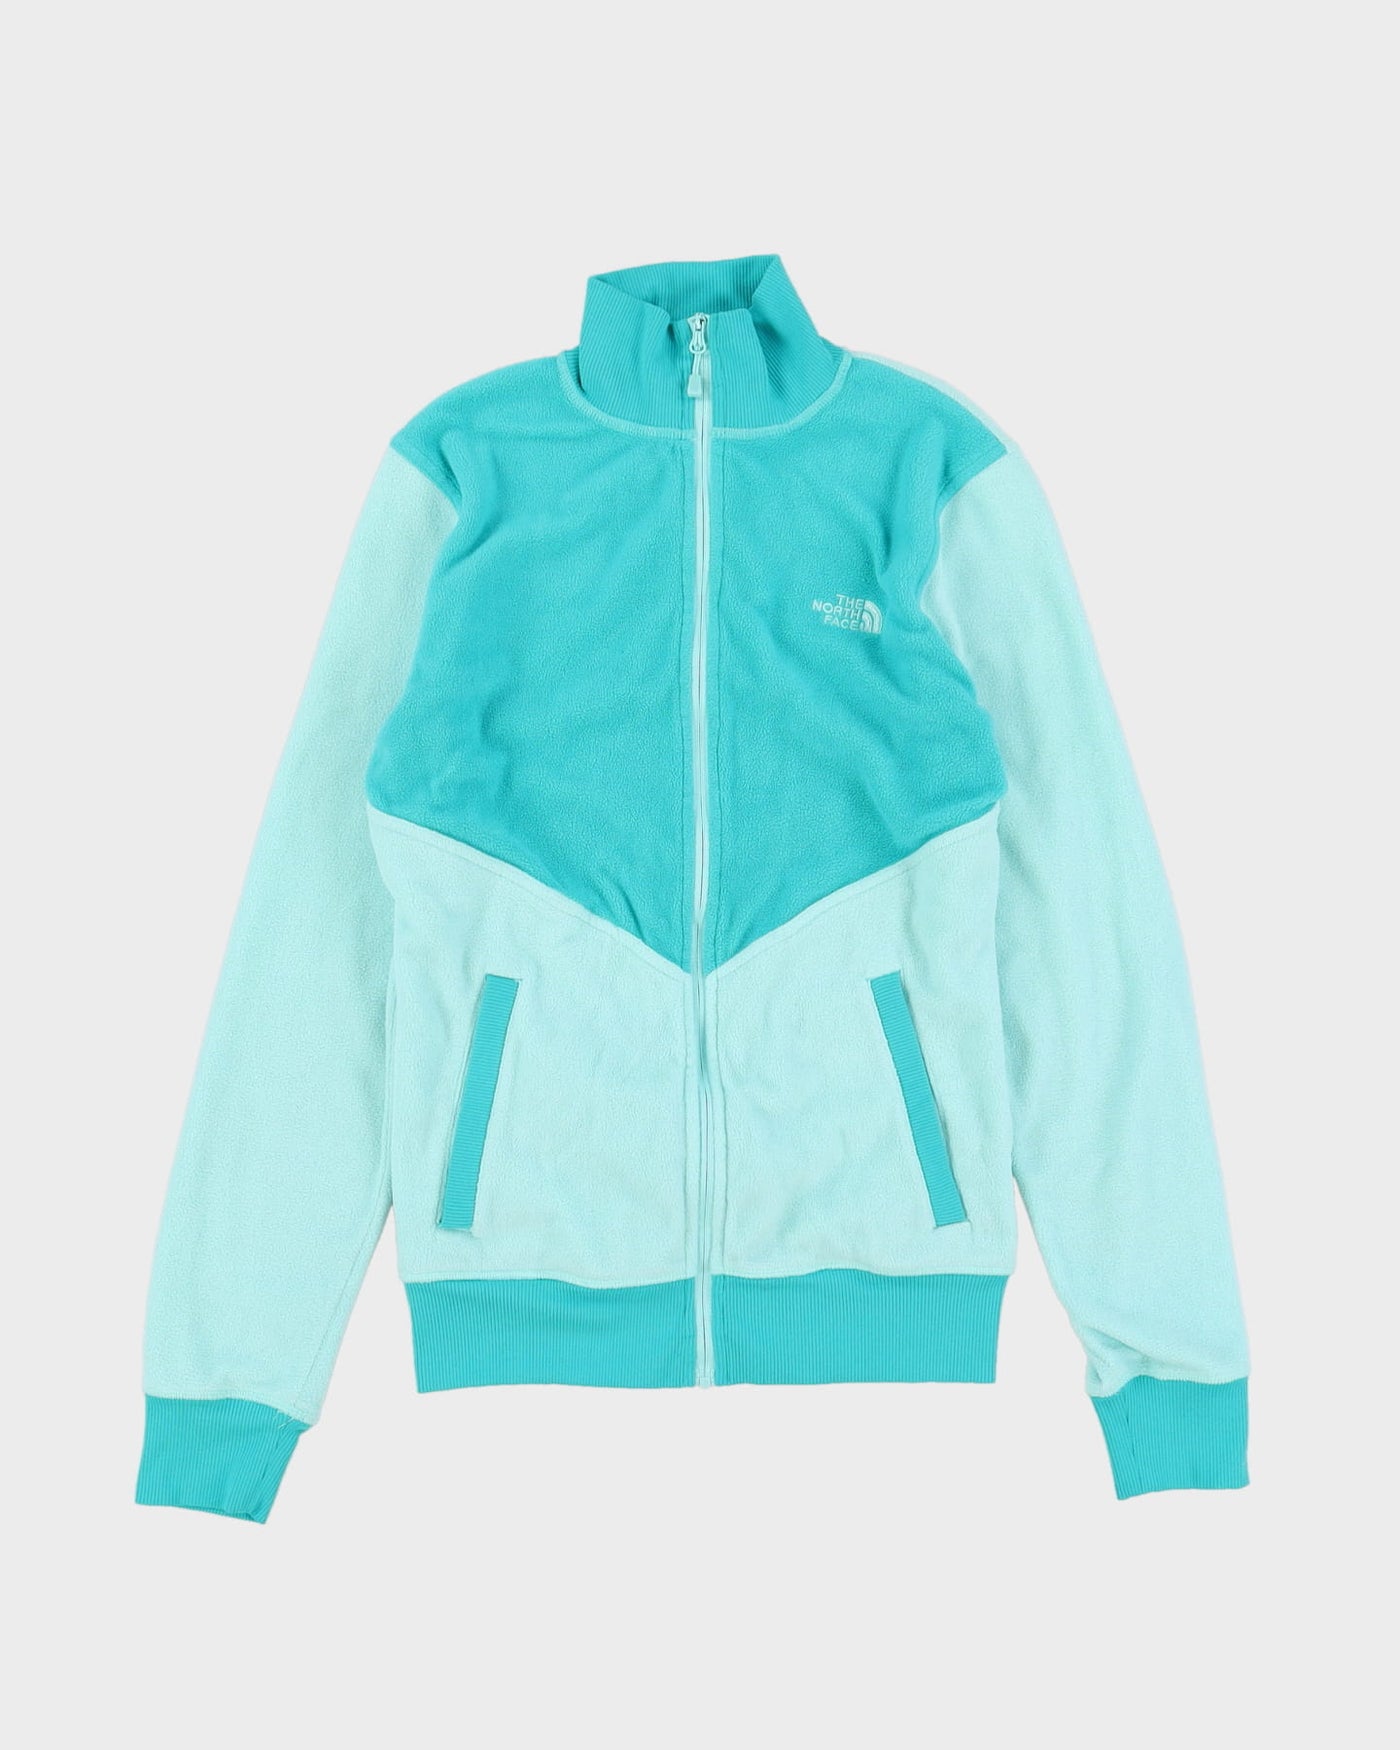 The North Face Blue Two-Tone Full-Zip Fleece - S